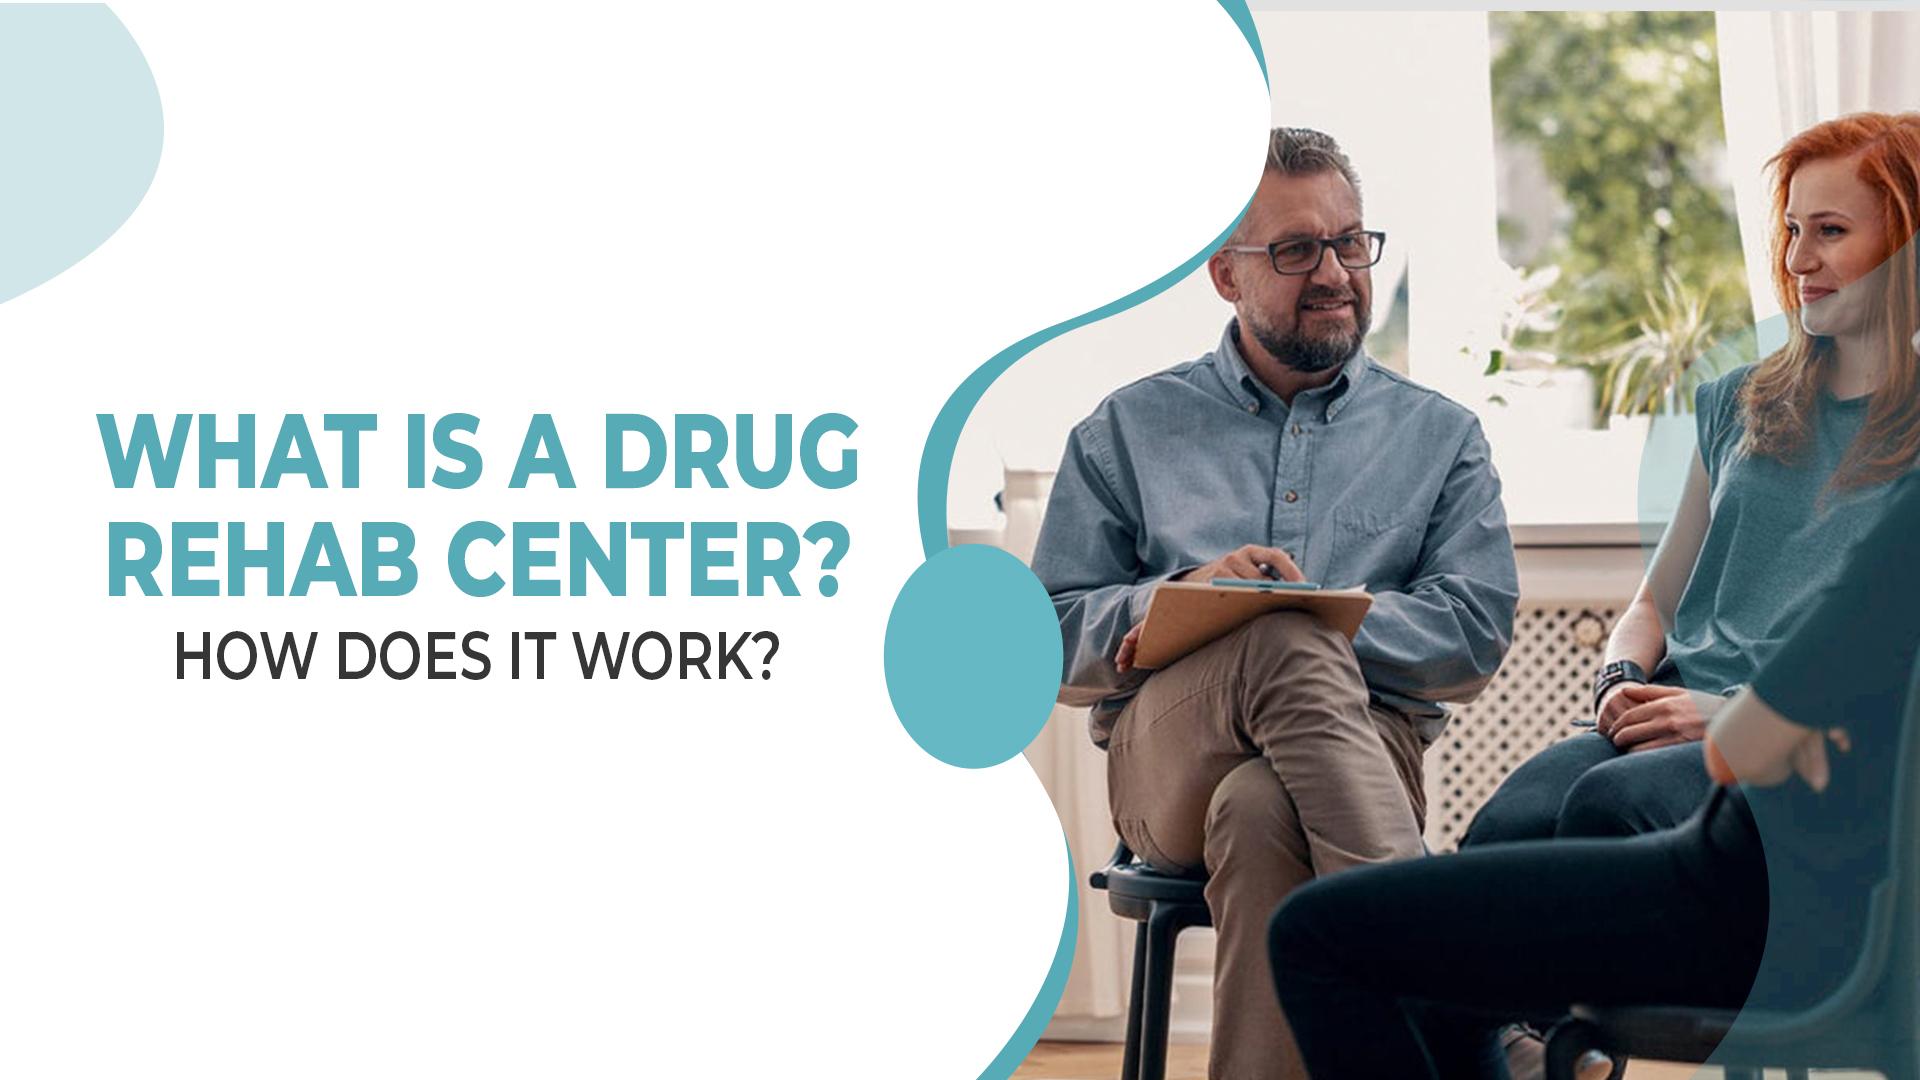 What is a drug rehab center